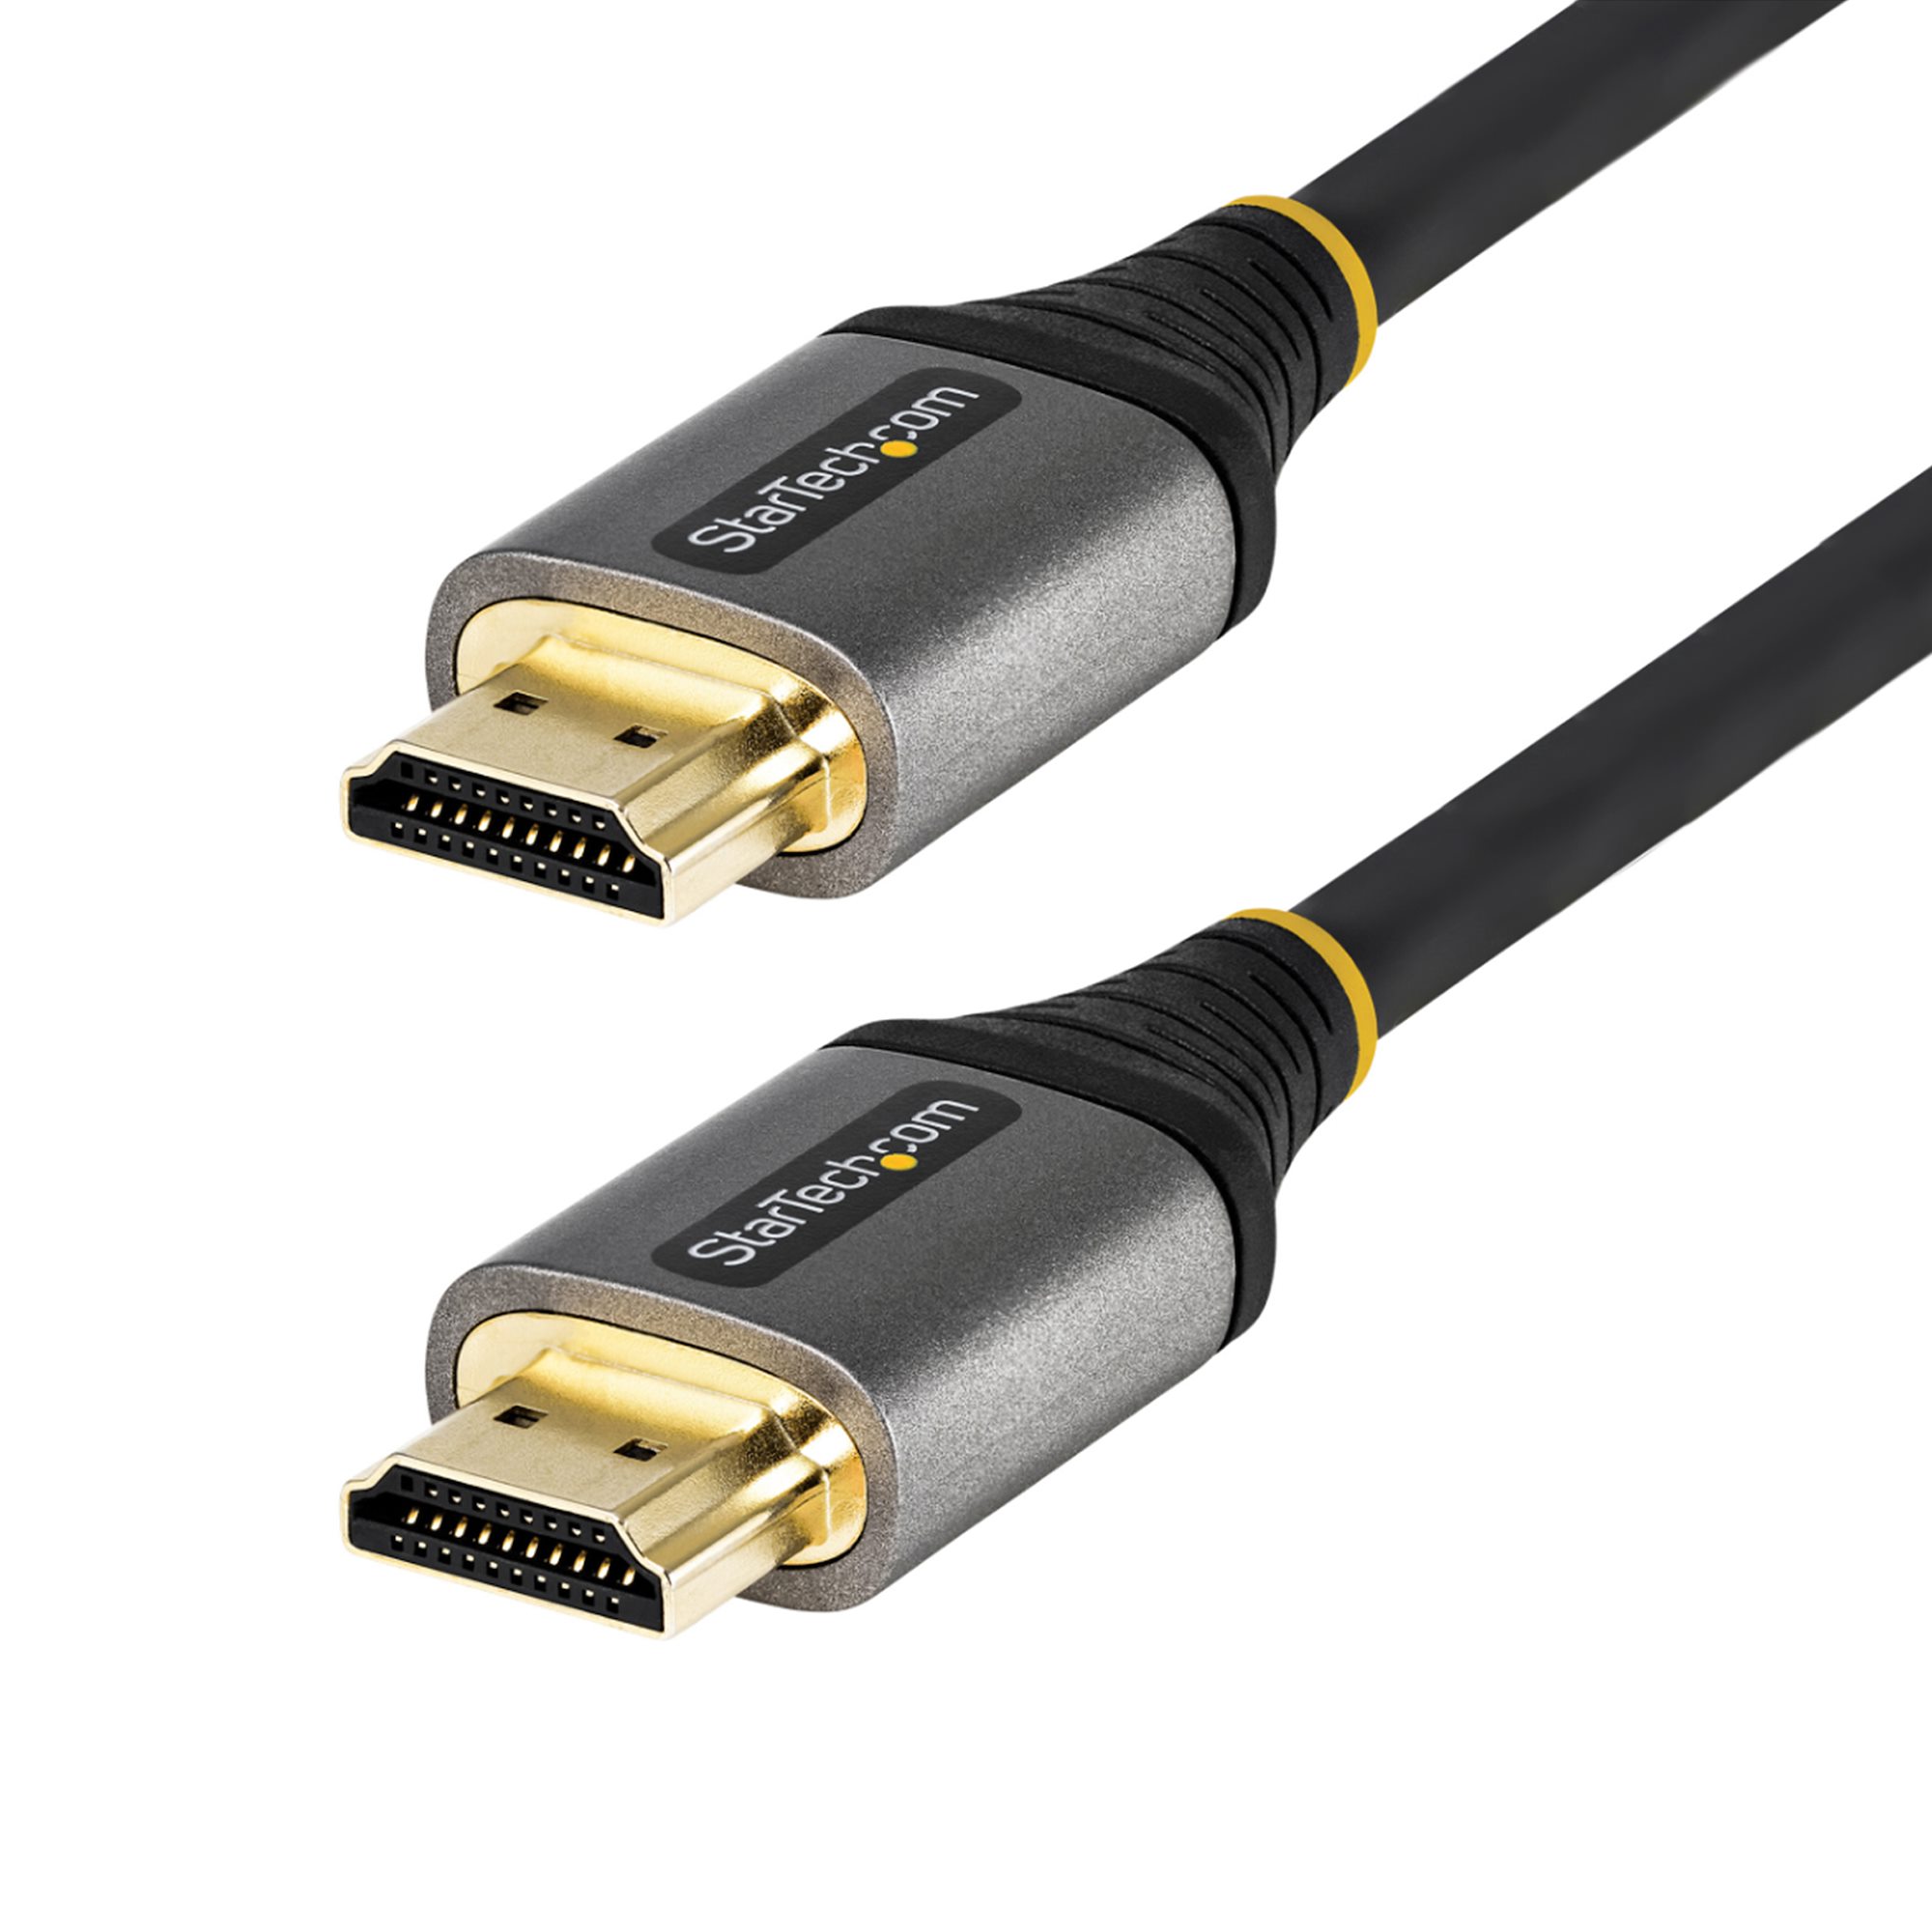 3 Meter HDMI to Mini C Cable / 12 FT